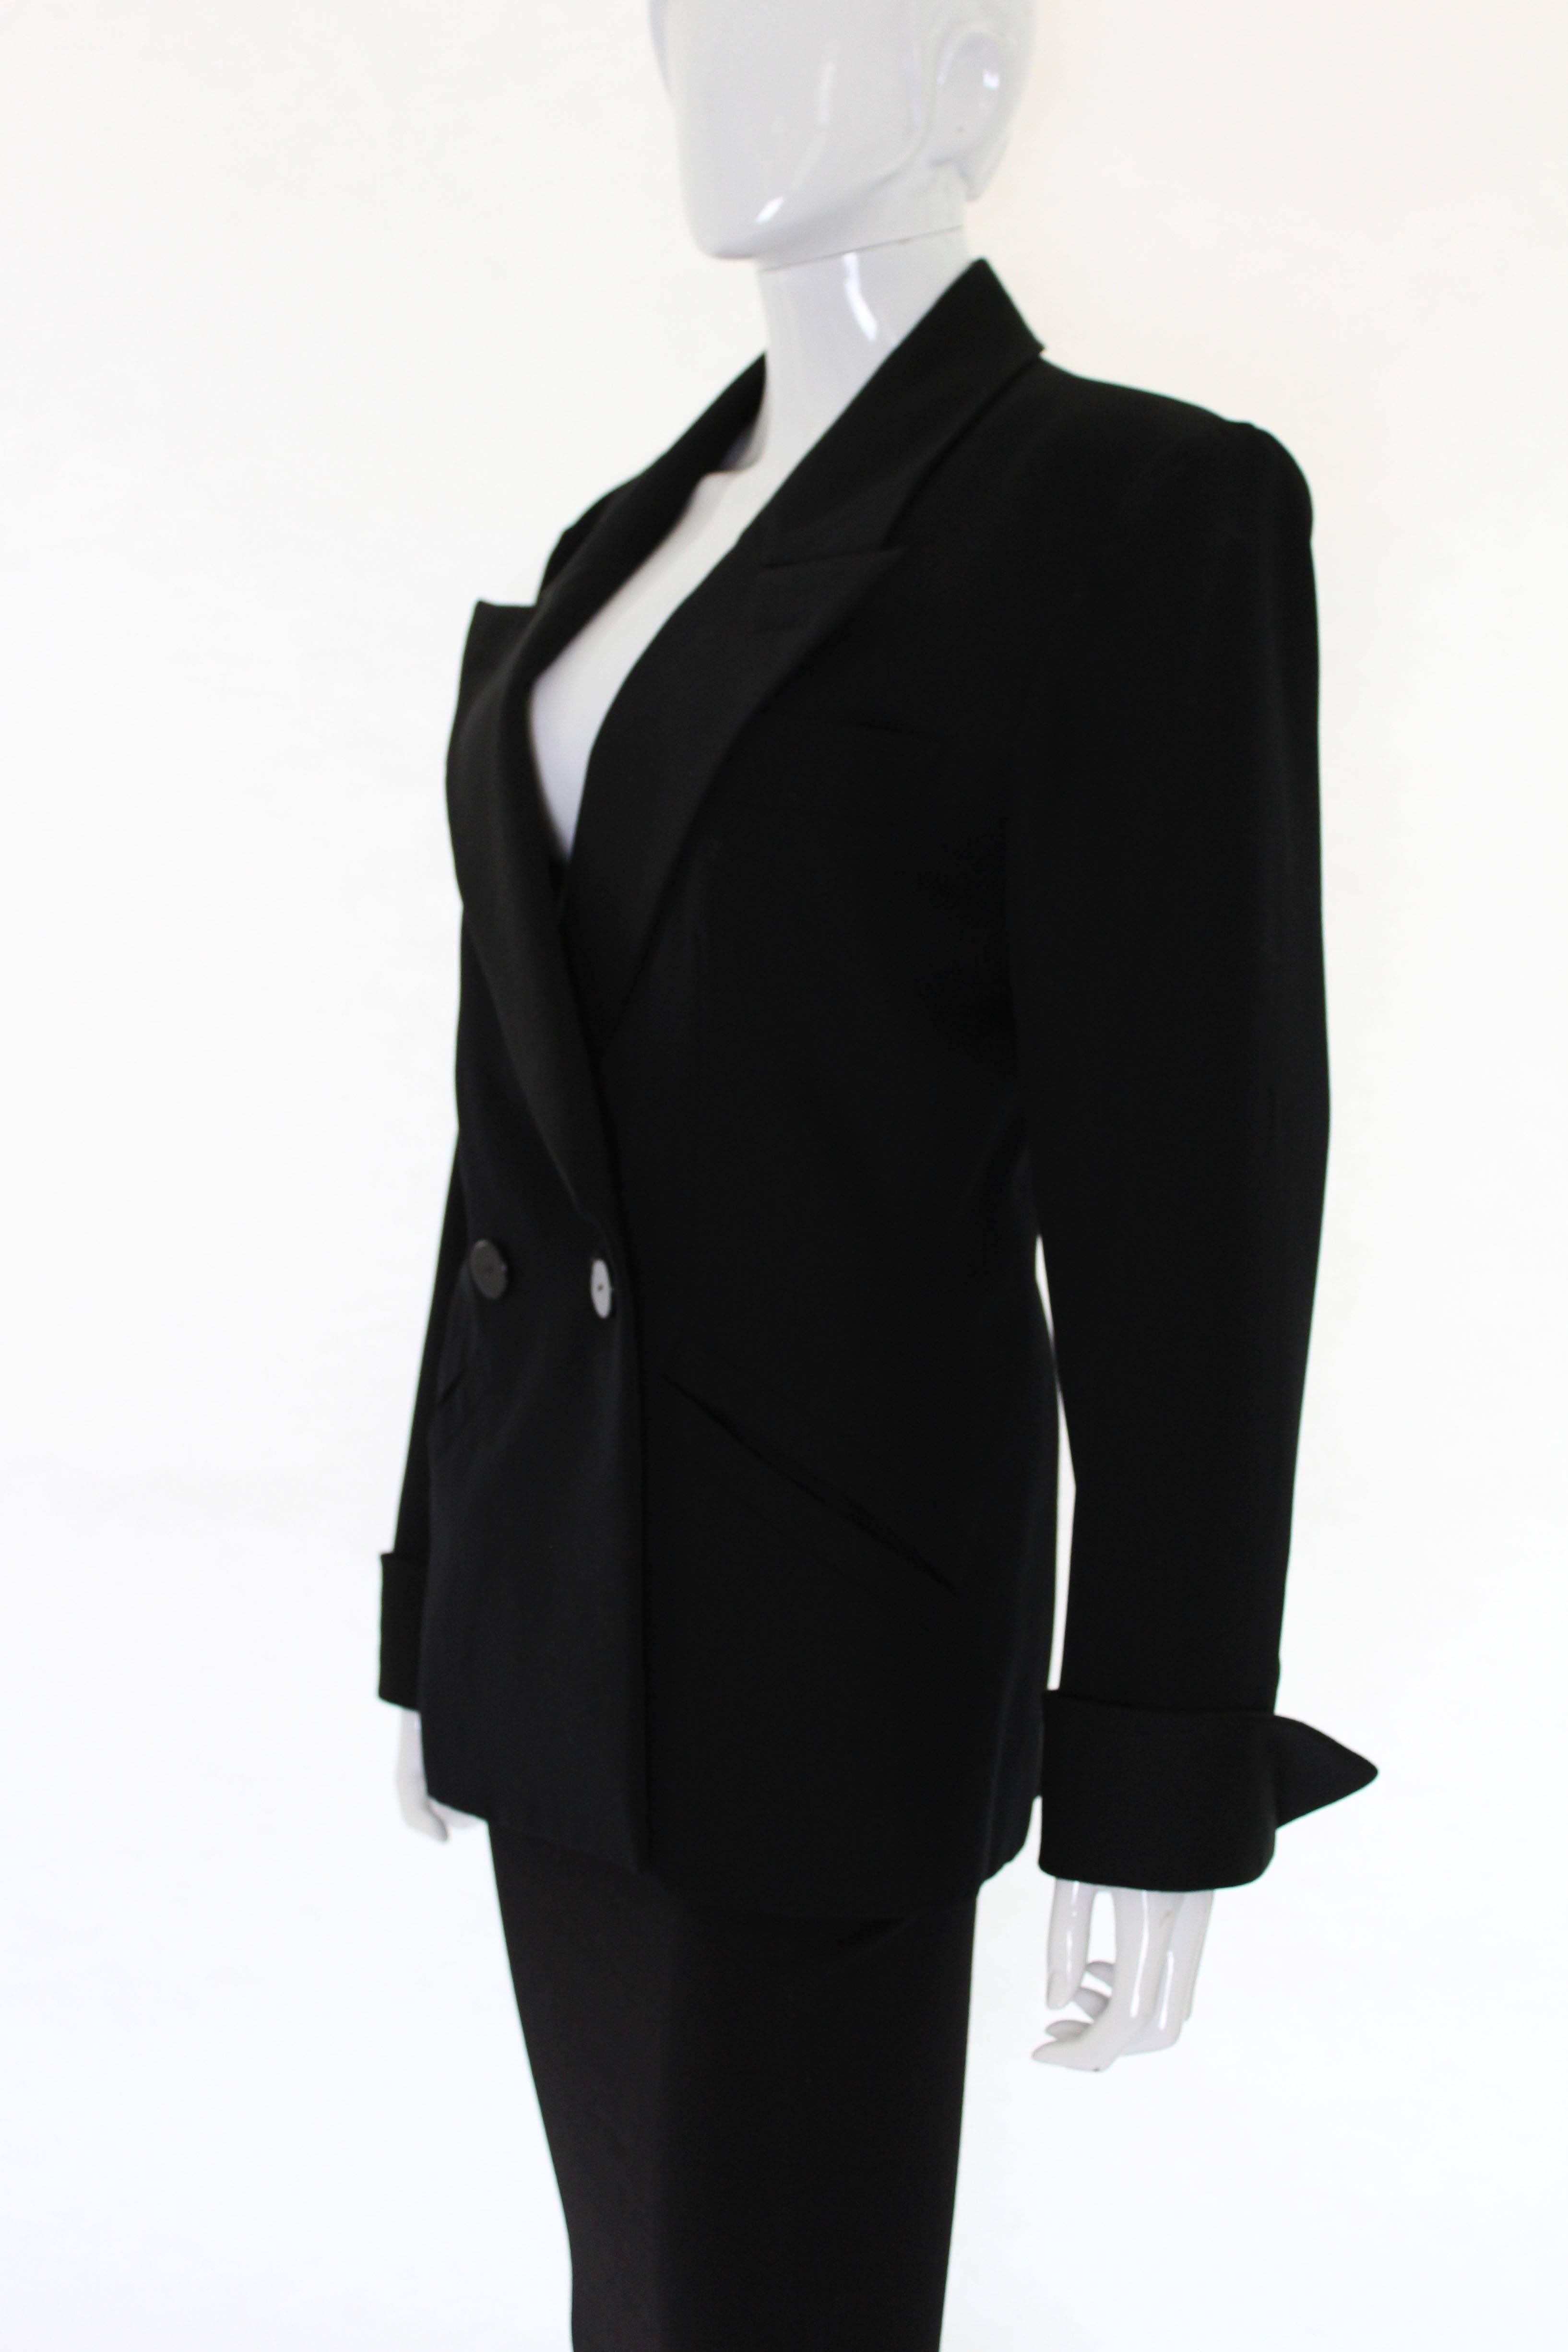 A super smoking jacket by Yves  Saint Laurent, Rive Gauche. In black wool with satin lapels and cuffs , this is a stylish addition to any wardrobe. The jacket has two buttons on the front ,with stylish sloping pockets on either side. There are two